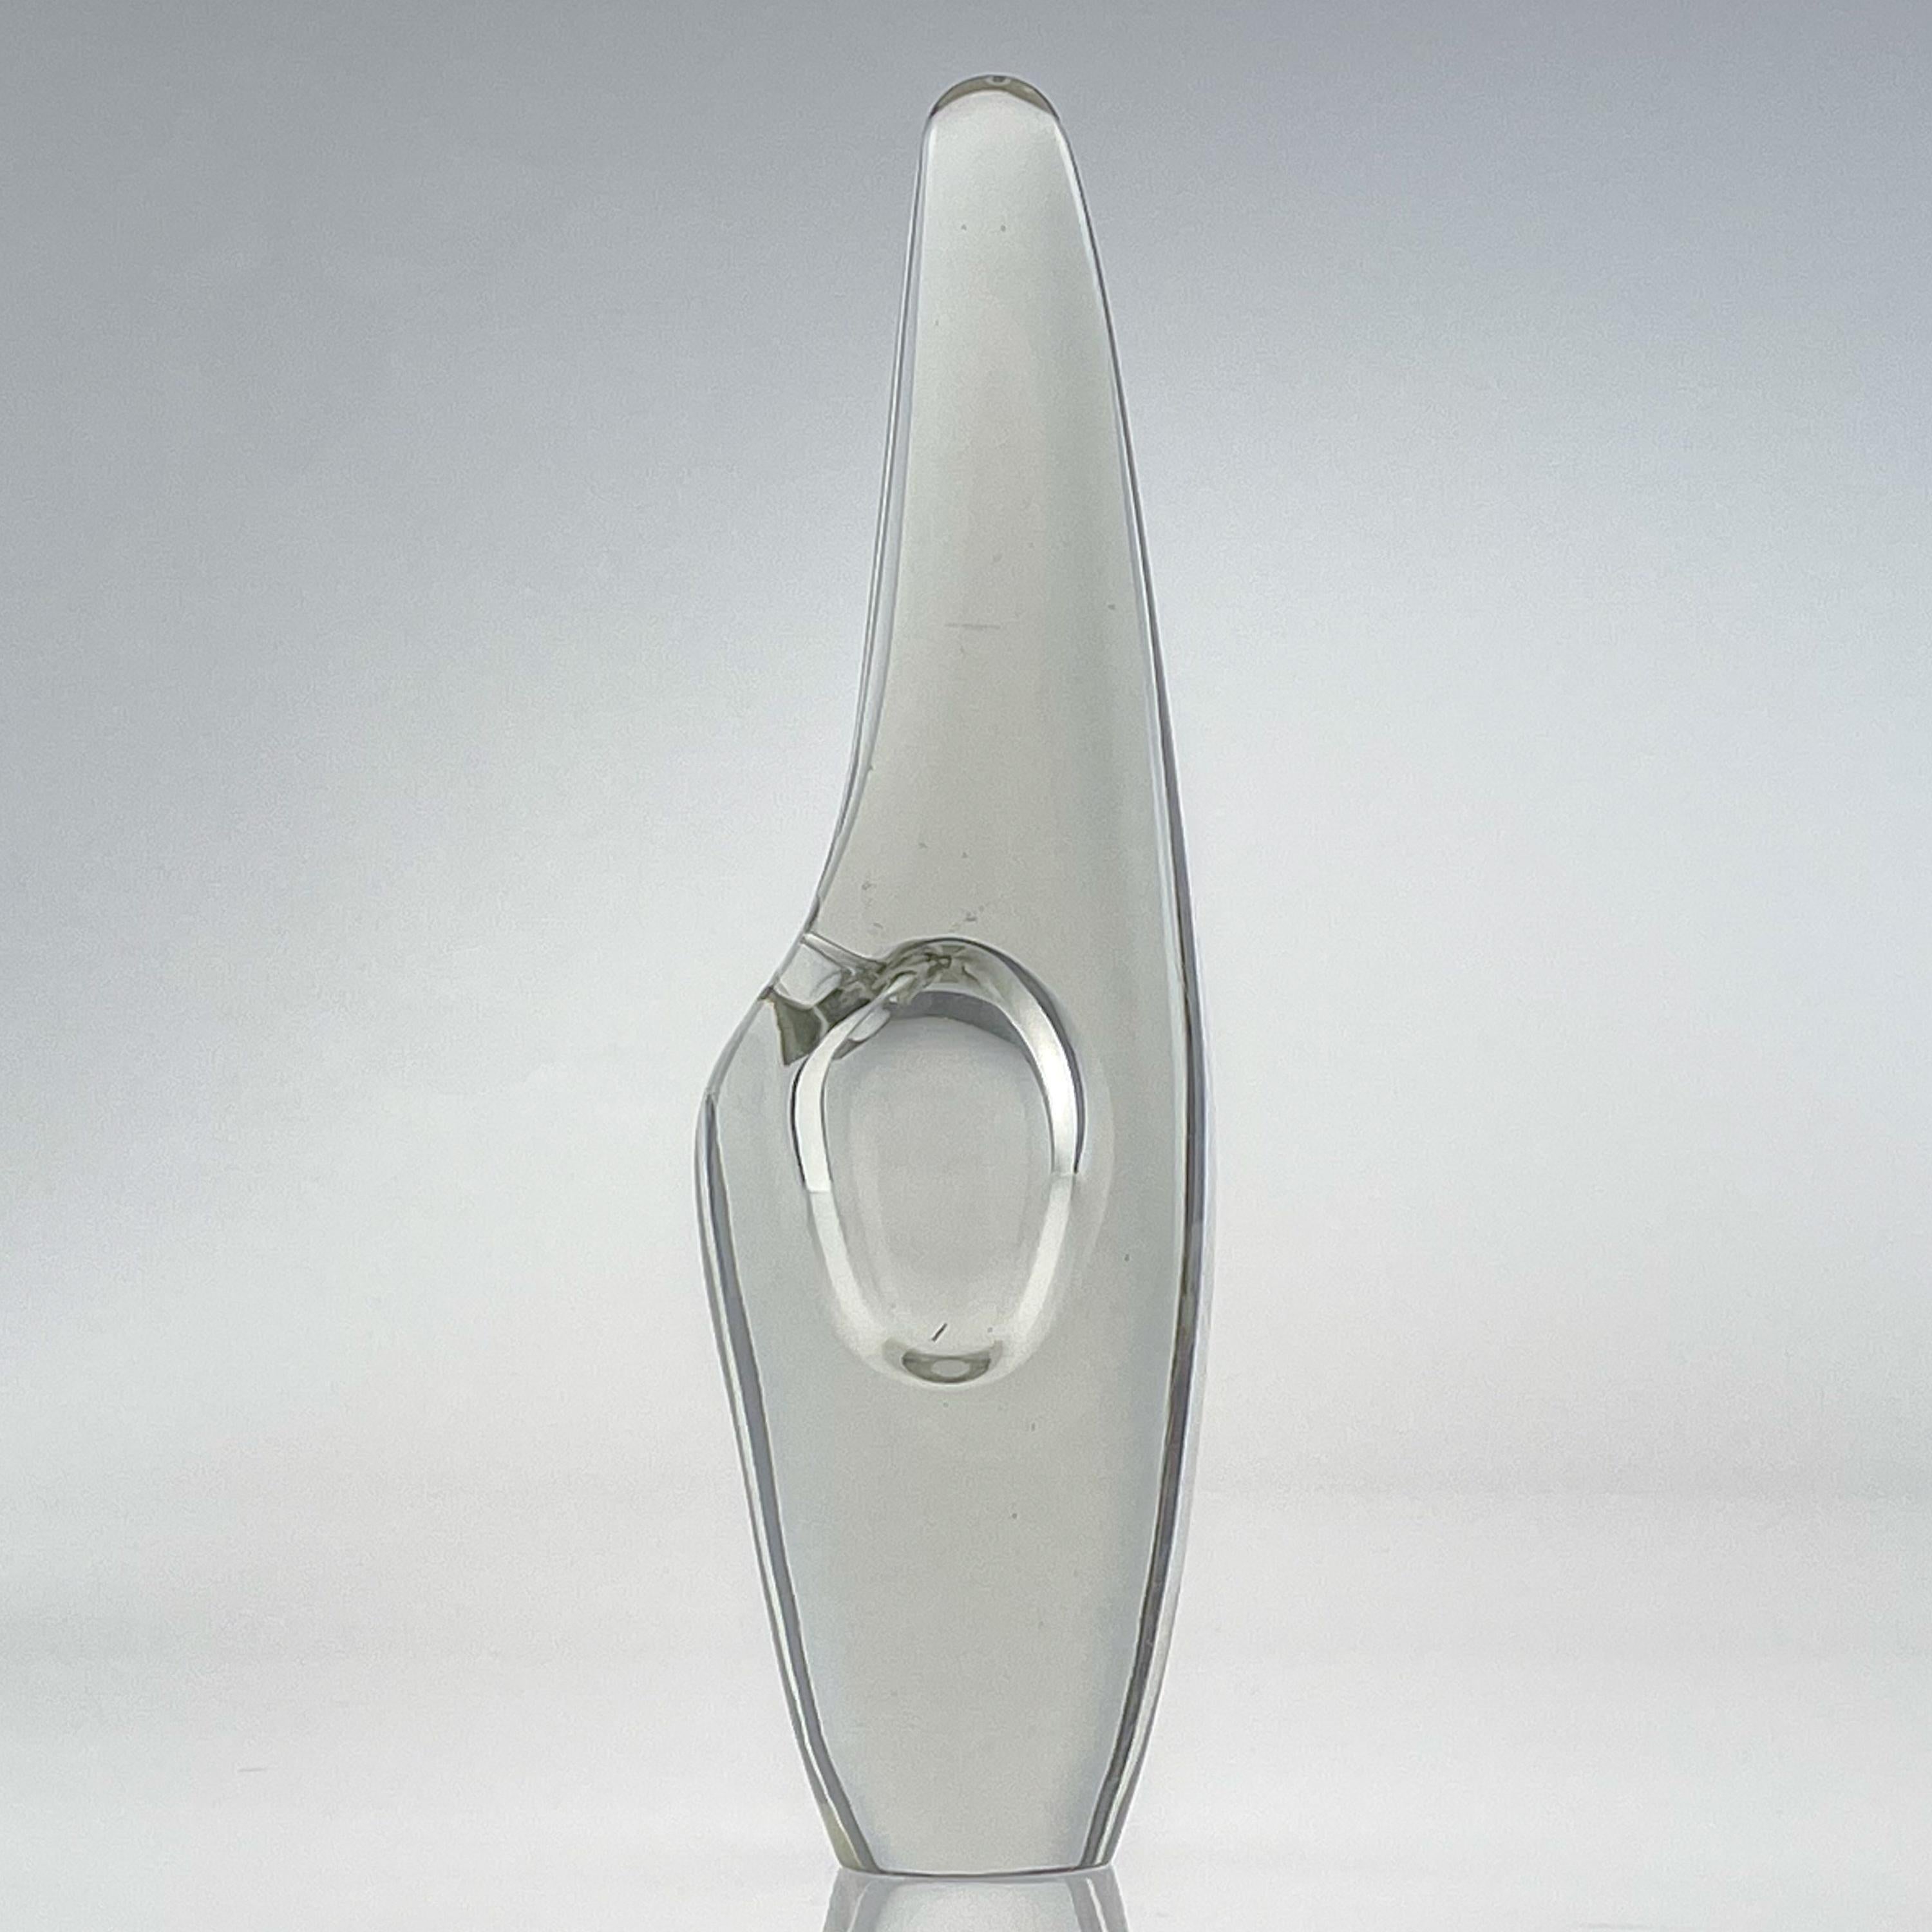 Scandinavian Modern Timo Sarpaneva Crystal Art Object Sculpture Orchid 1957

Clear lead crystal glass, steam blown interior, cut and surface polished Art-object / sculpture “Orkidea” (Orchid), model 3568. Designed by famous Finnish artist Timo